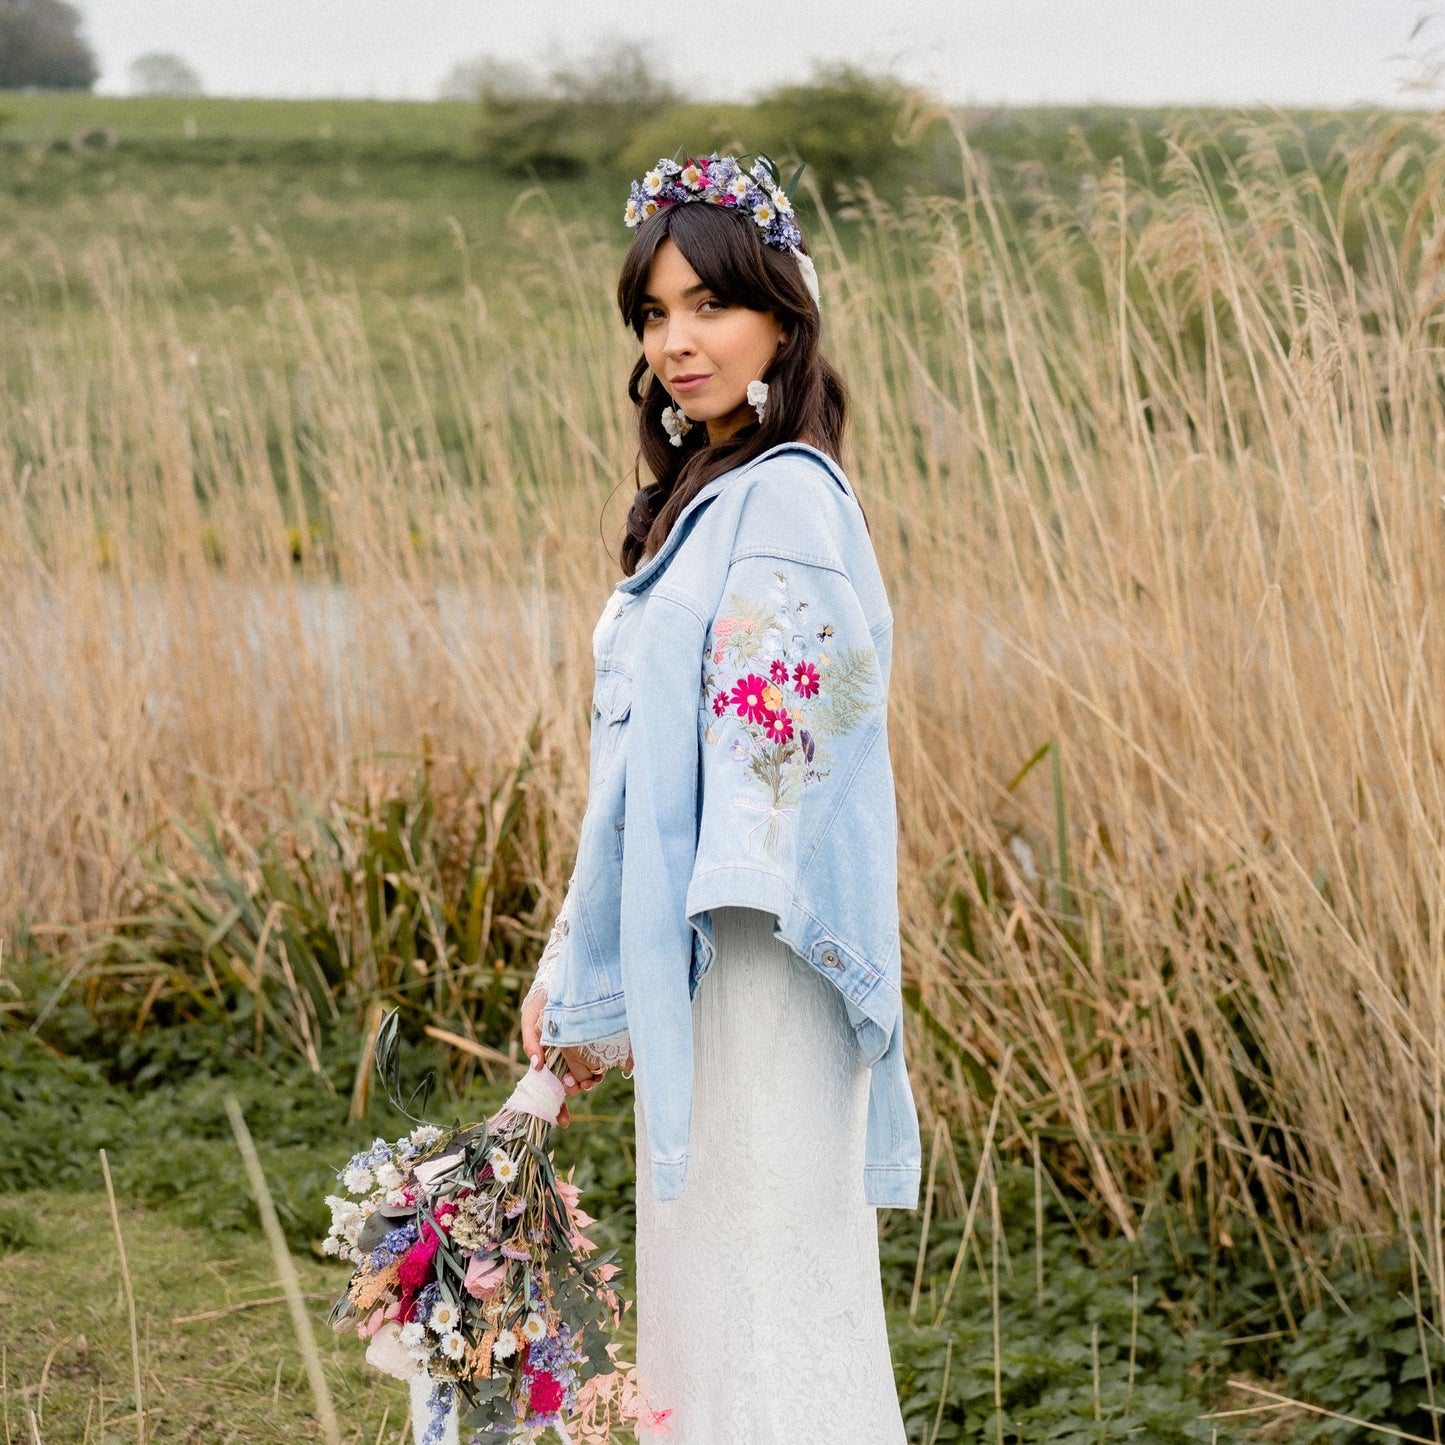 Flower Bouquet Denim Bridal Cover Up: Elevate your wedding style with this chic ecru embroidered jacket, featuring a delightful flower bouquet design for a touch of romantic elegance